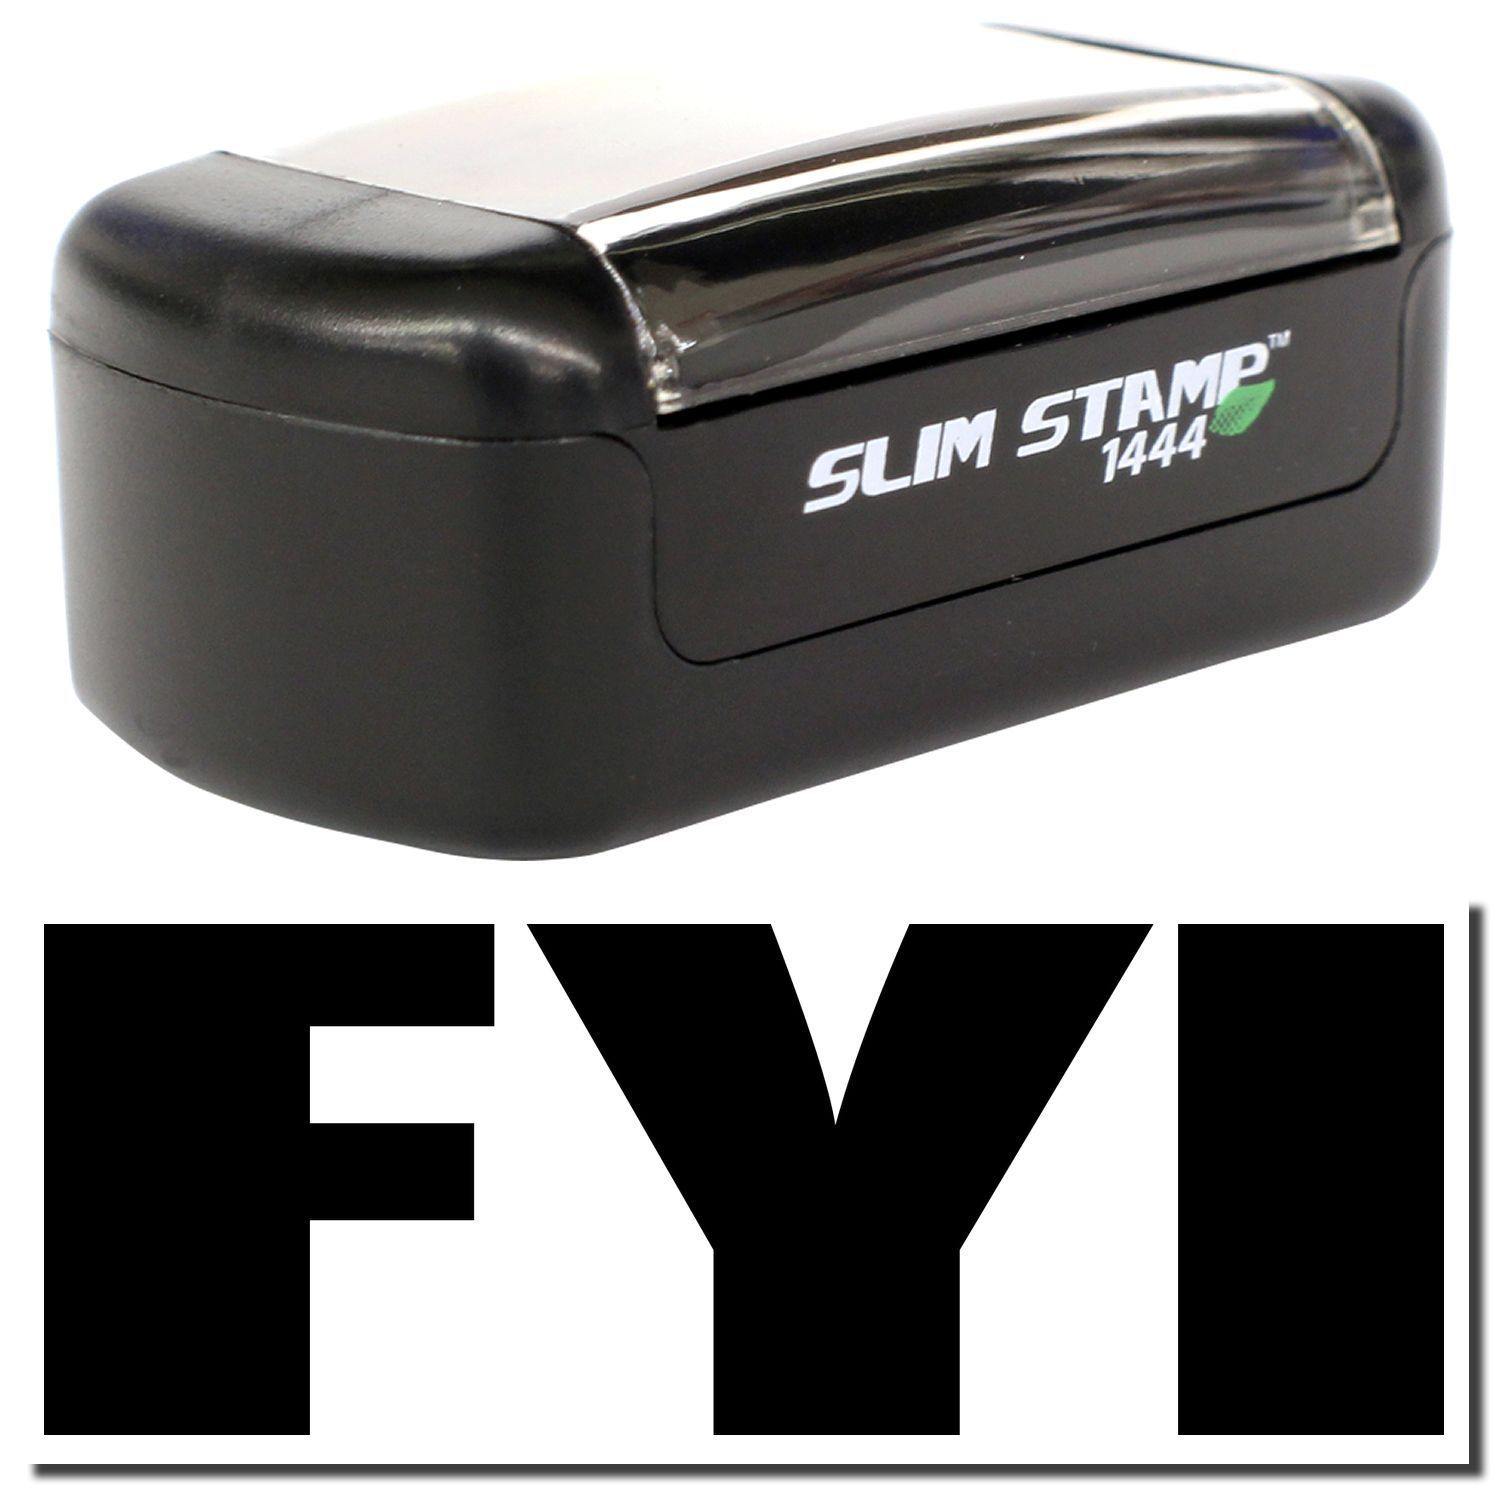 A stock office pre-inked stamp with a stamped image showing how the text "FYI" in bold font is displayed after stamping.